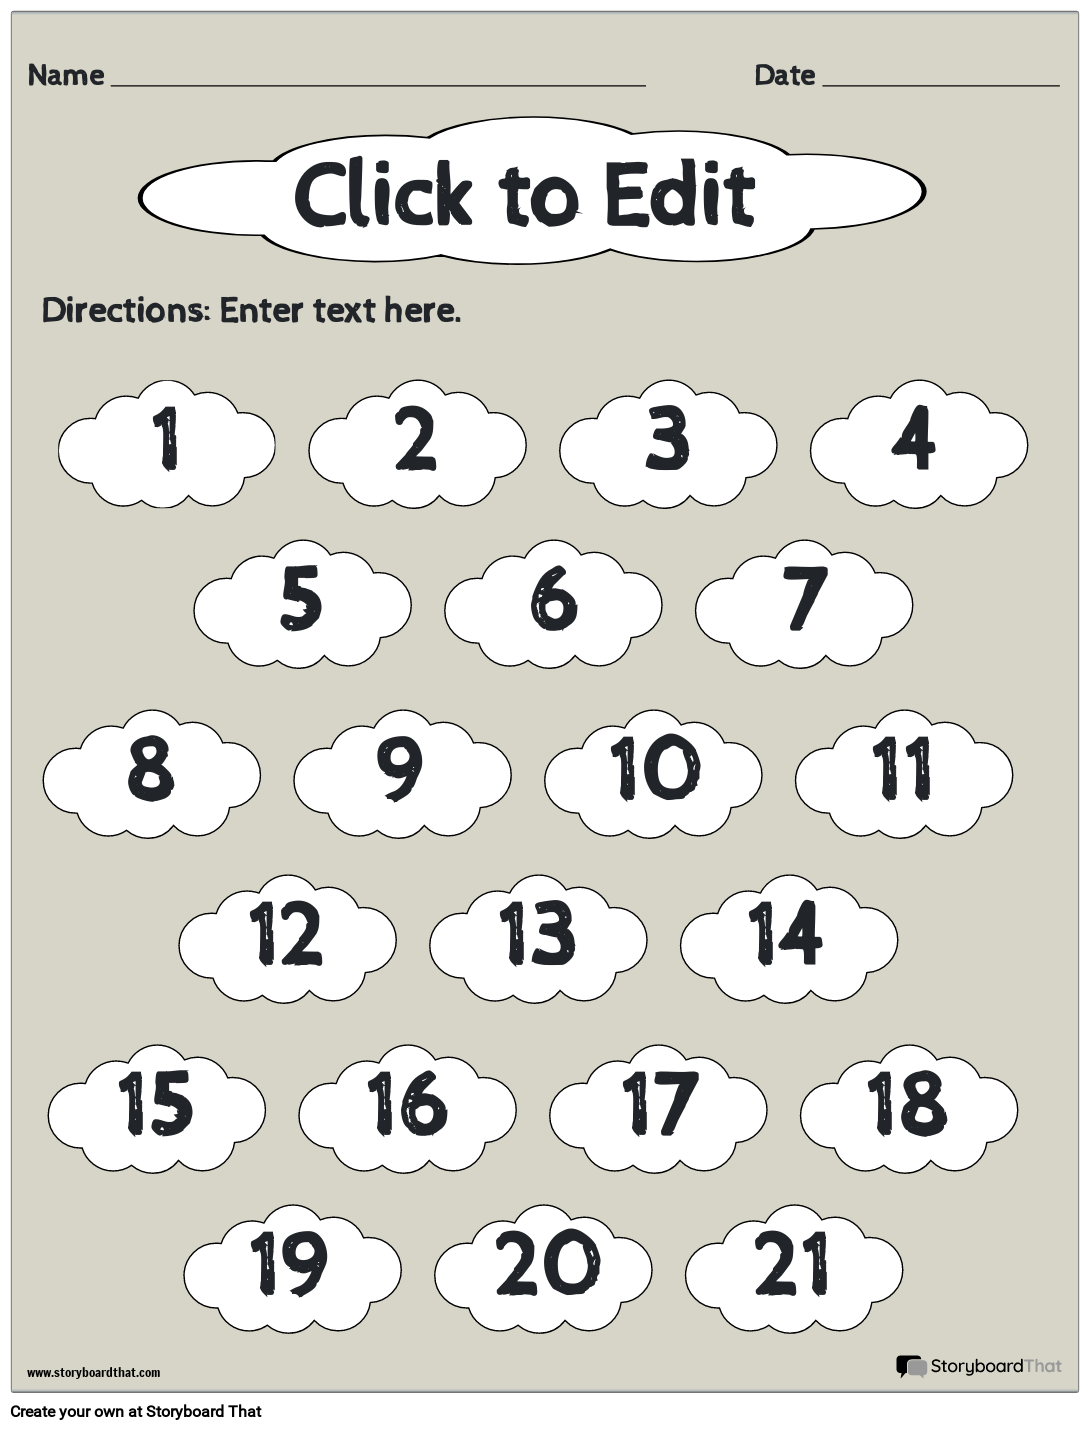 Odd and Even Numbers Worksheet Featuring Clouds B&W